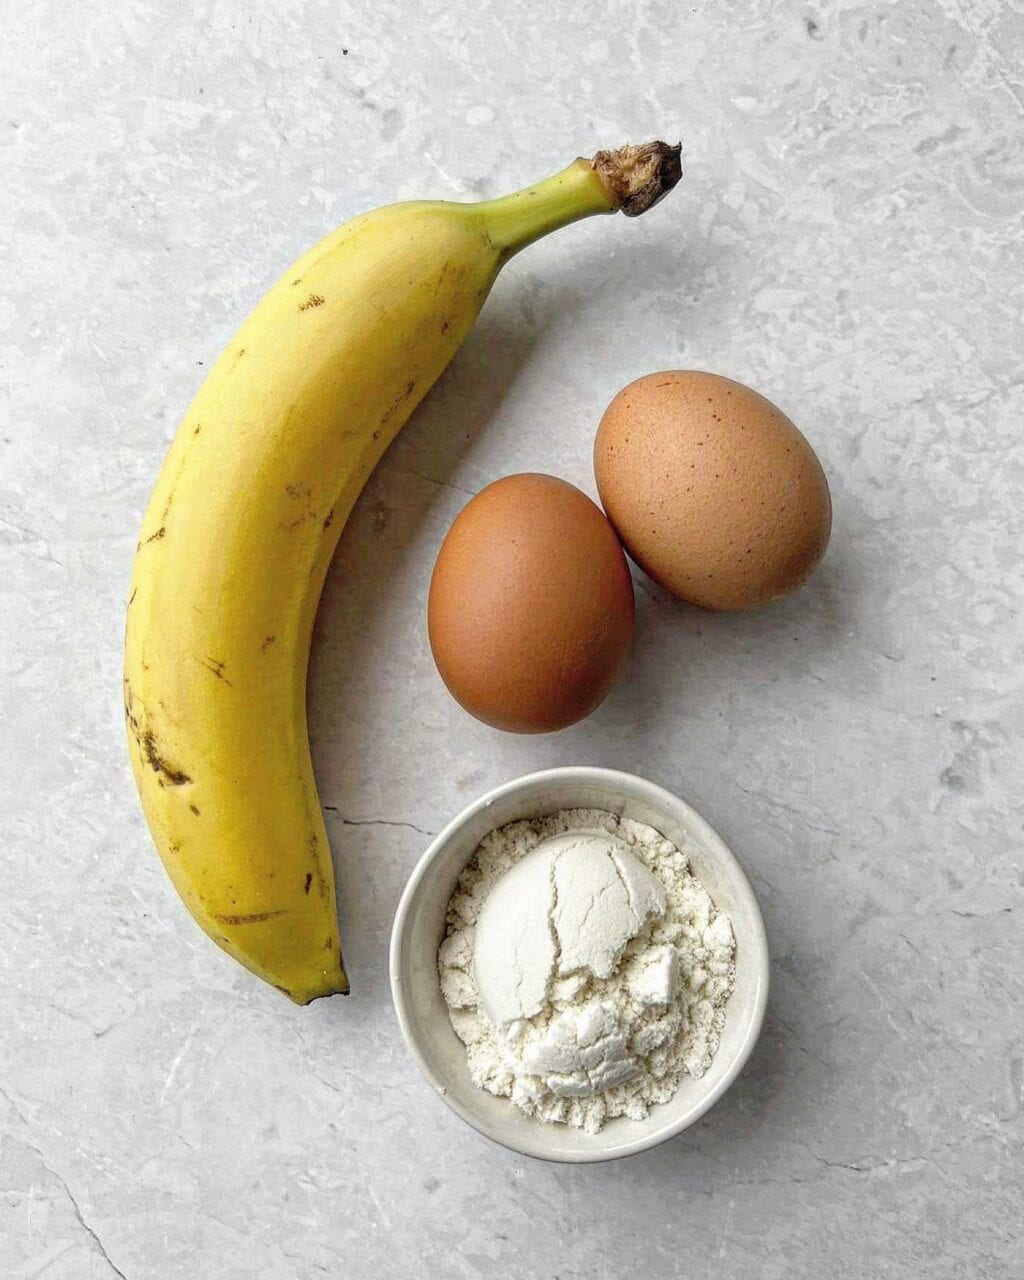 A photo of the ingredients needed to make banana protein pancakes, including a whole banana, a small bowl of protein powder and two eggs.